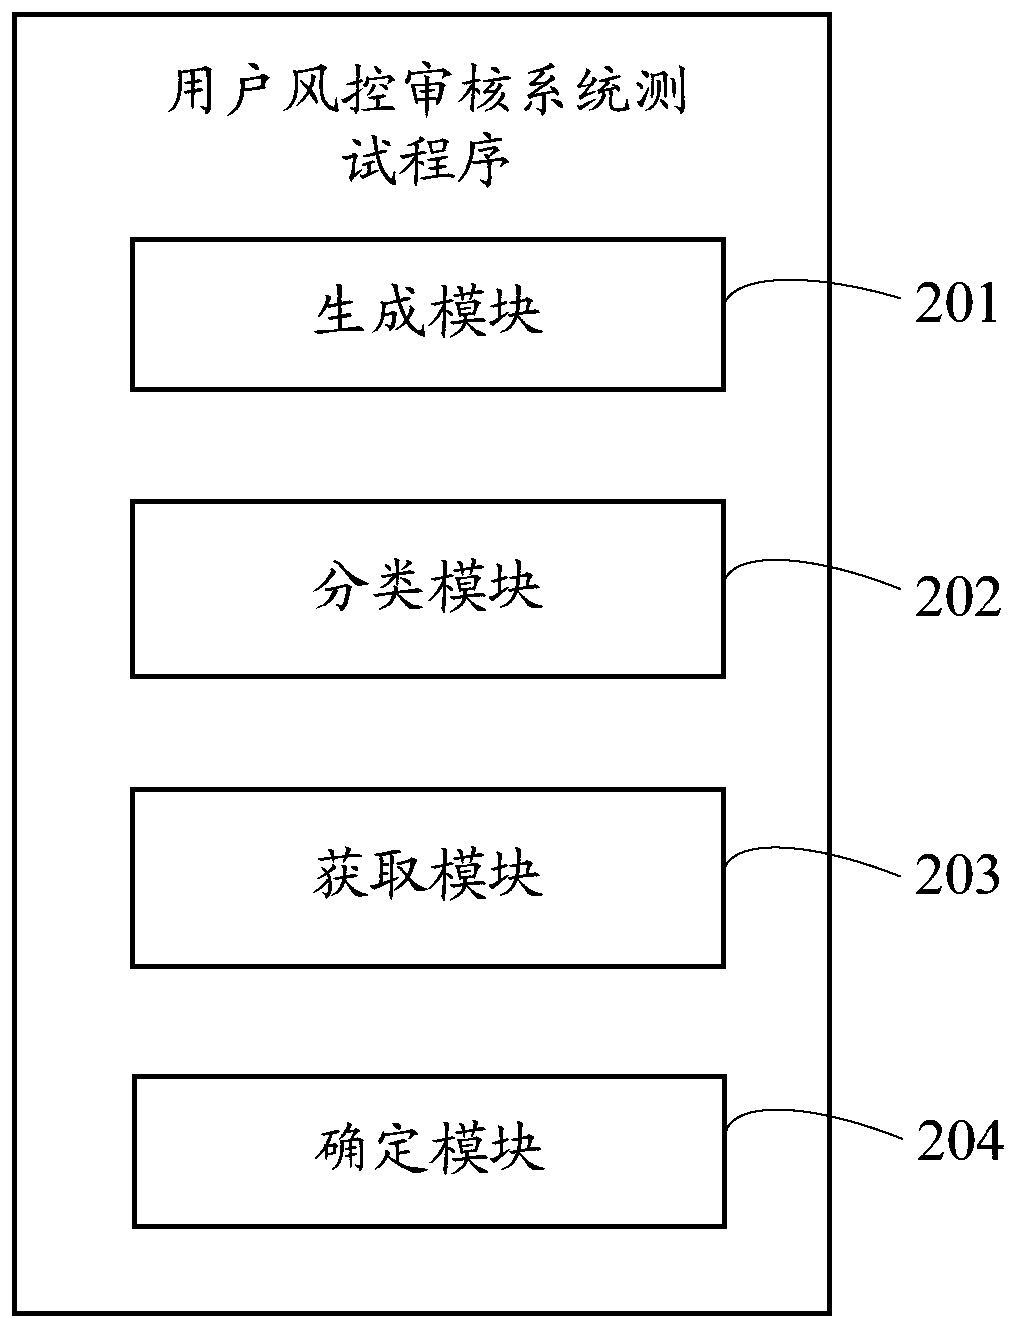 Electronic device, user risk control auditing system test method and storage medium